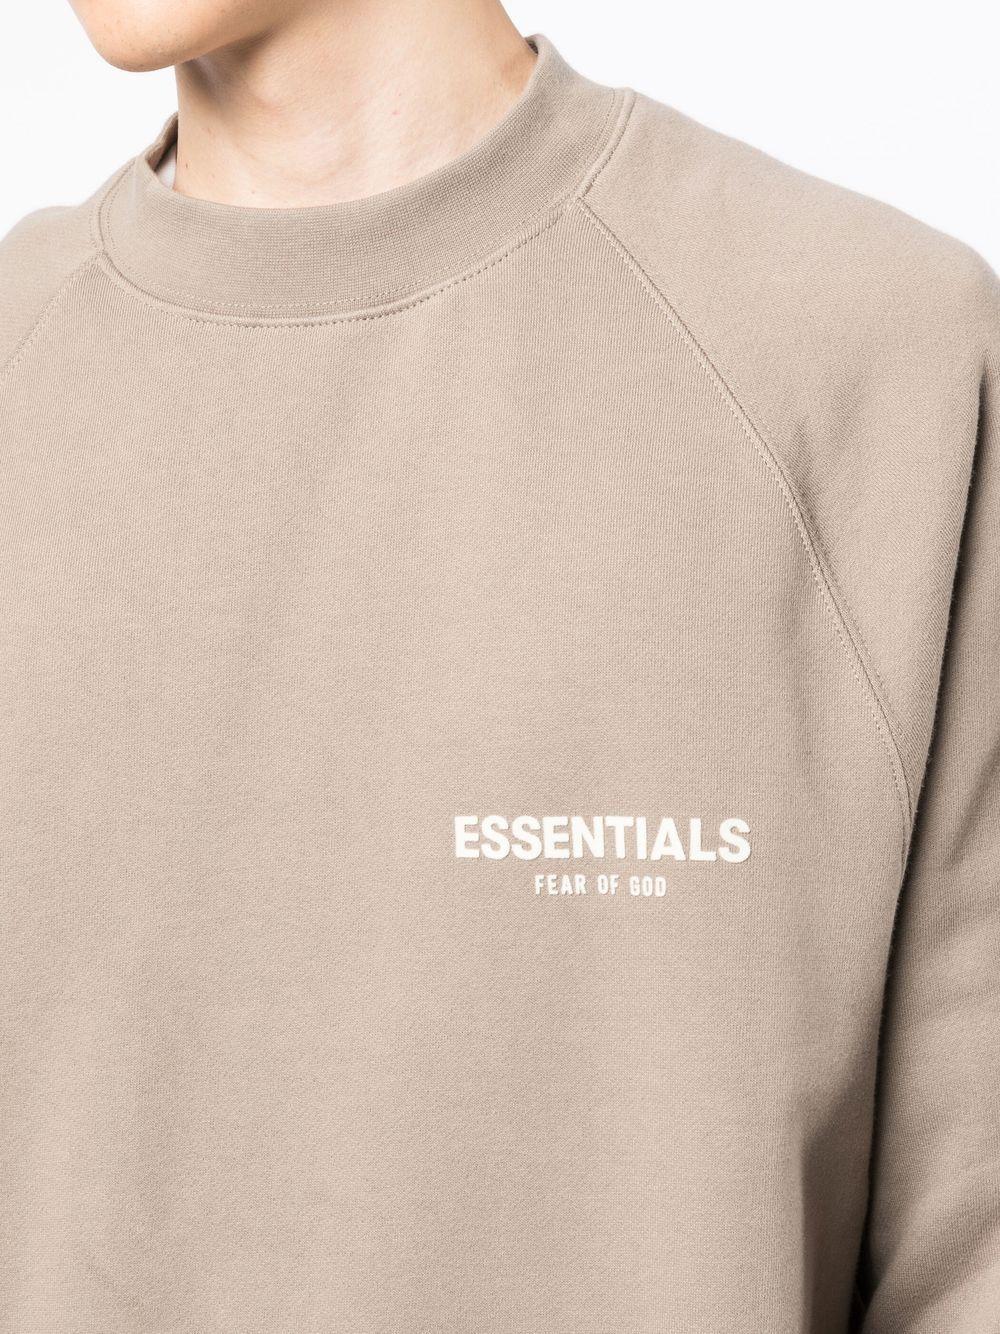 Fear of God ESSENTIALS Crew-neck Logo Sweatshirt in Natural for 